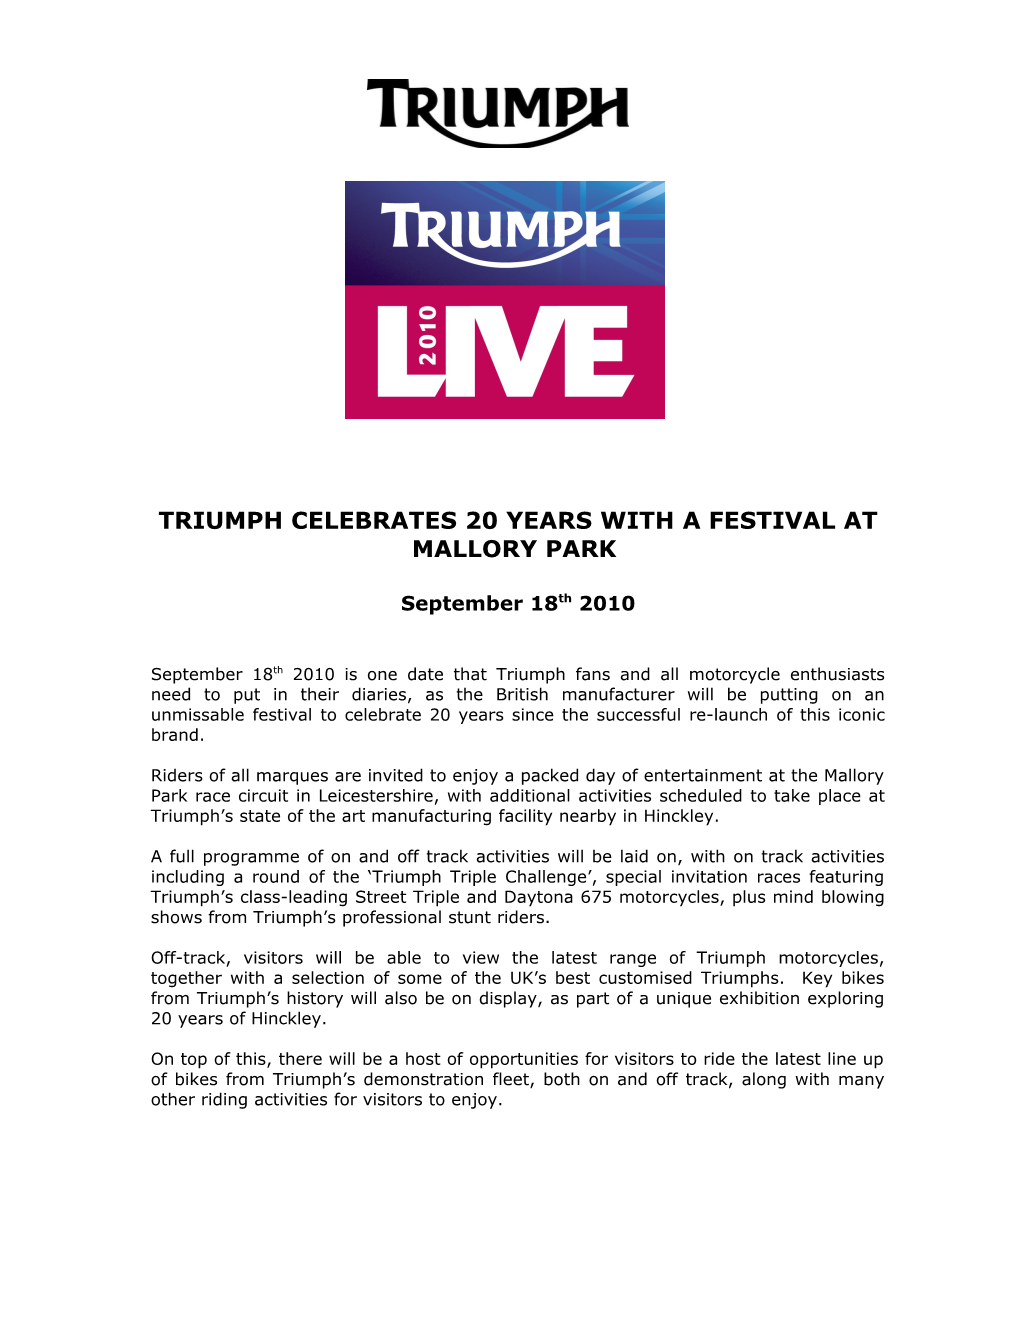 Triumph Celebrates 20 Years with Party in the Park